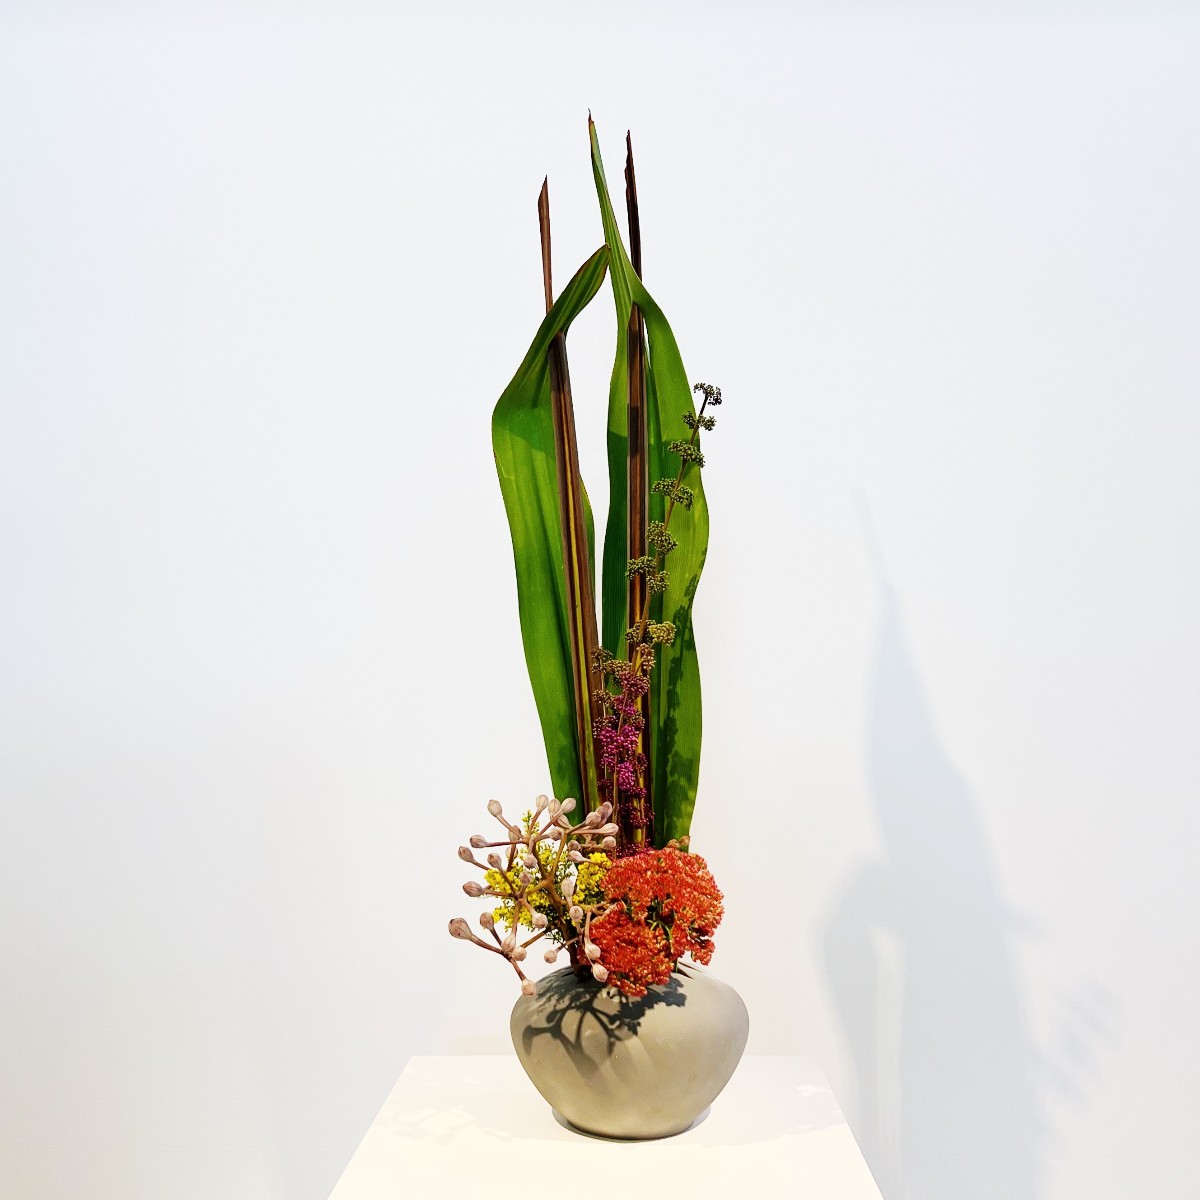 Chieko Klerkx's towering ikebana arrangement is sparking joy at GOMA this weekend 🍃〰️🍂

See it on display from 10.00am – 5.00pm daily. 

#IkebanaFriday #MuseumBouquet #QAGOMA